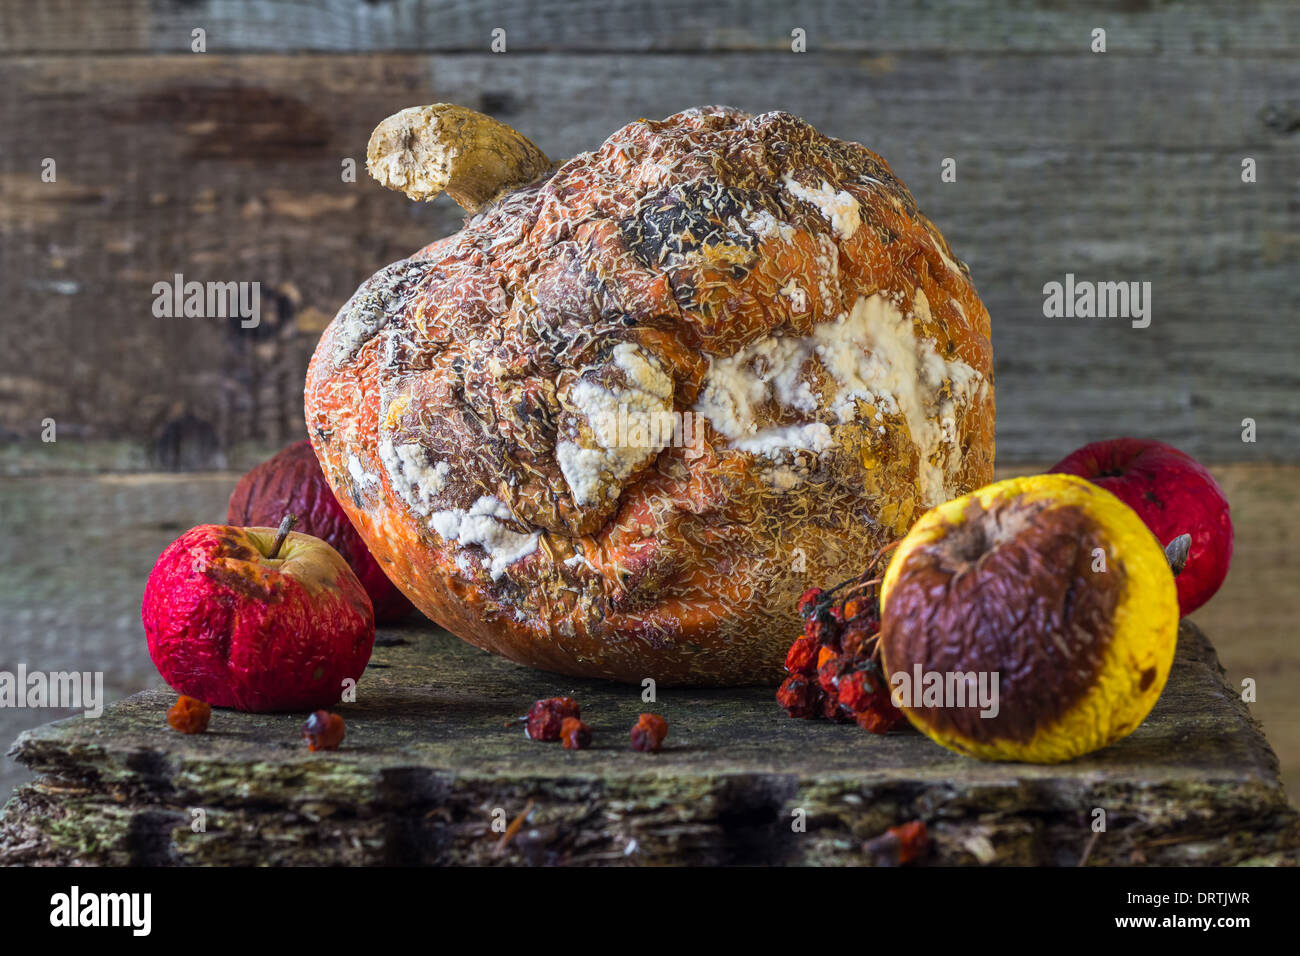 Old and rotten fruit on wooden board Stock Photo